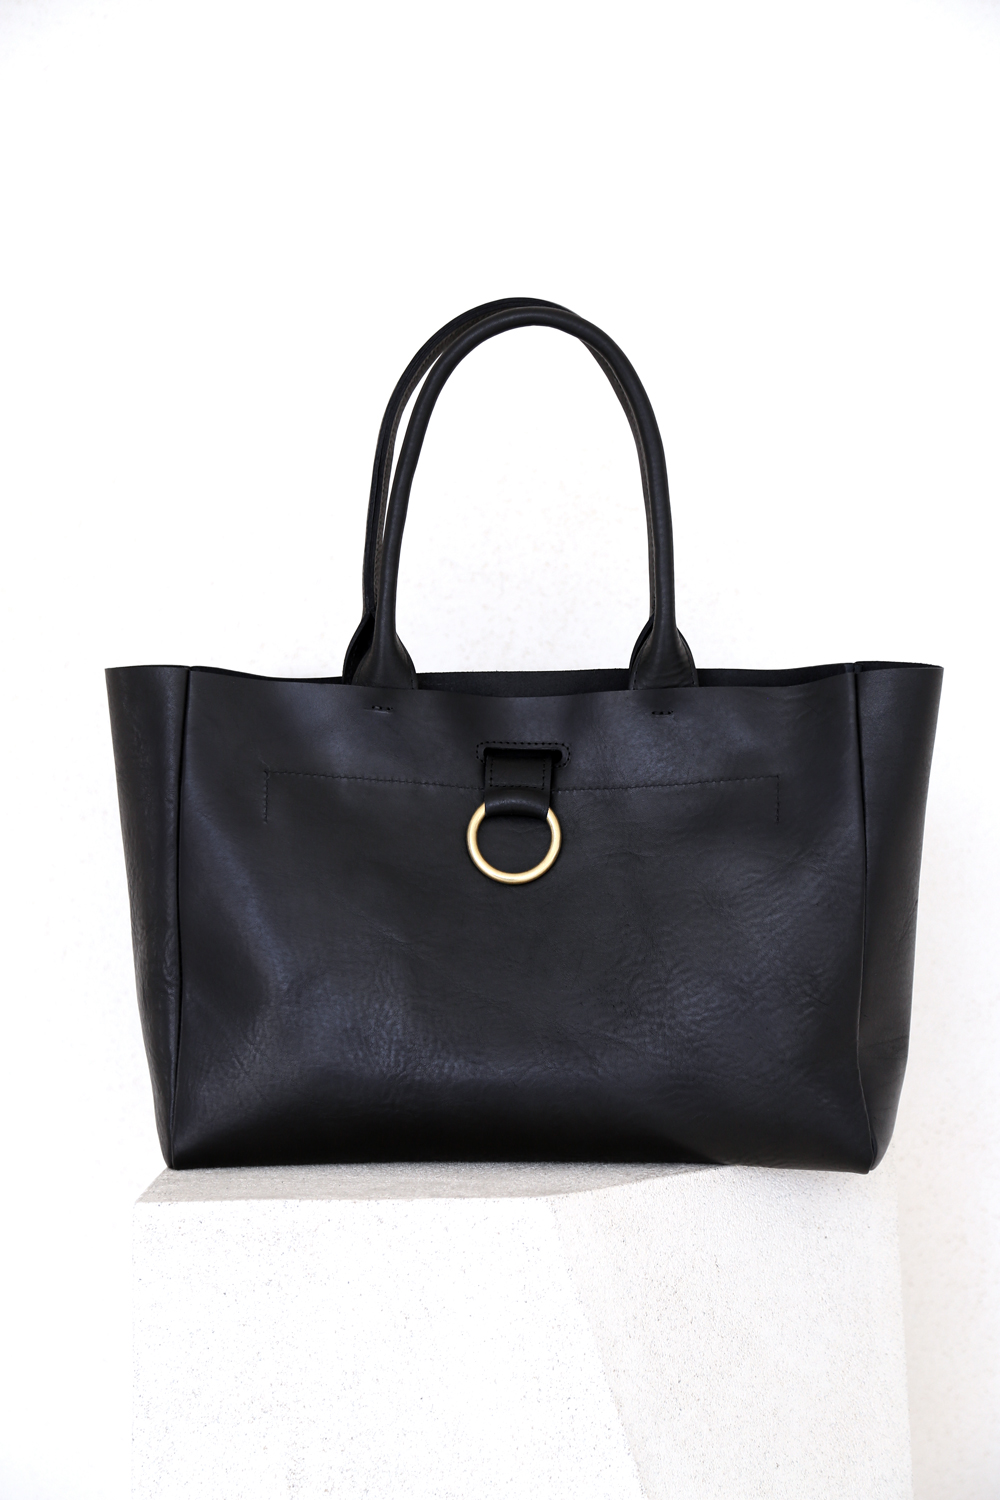 Ring Tote Black - Corîu - Leather Bags